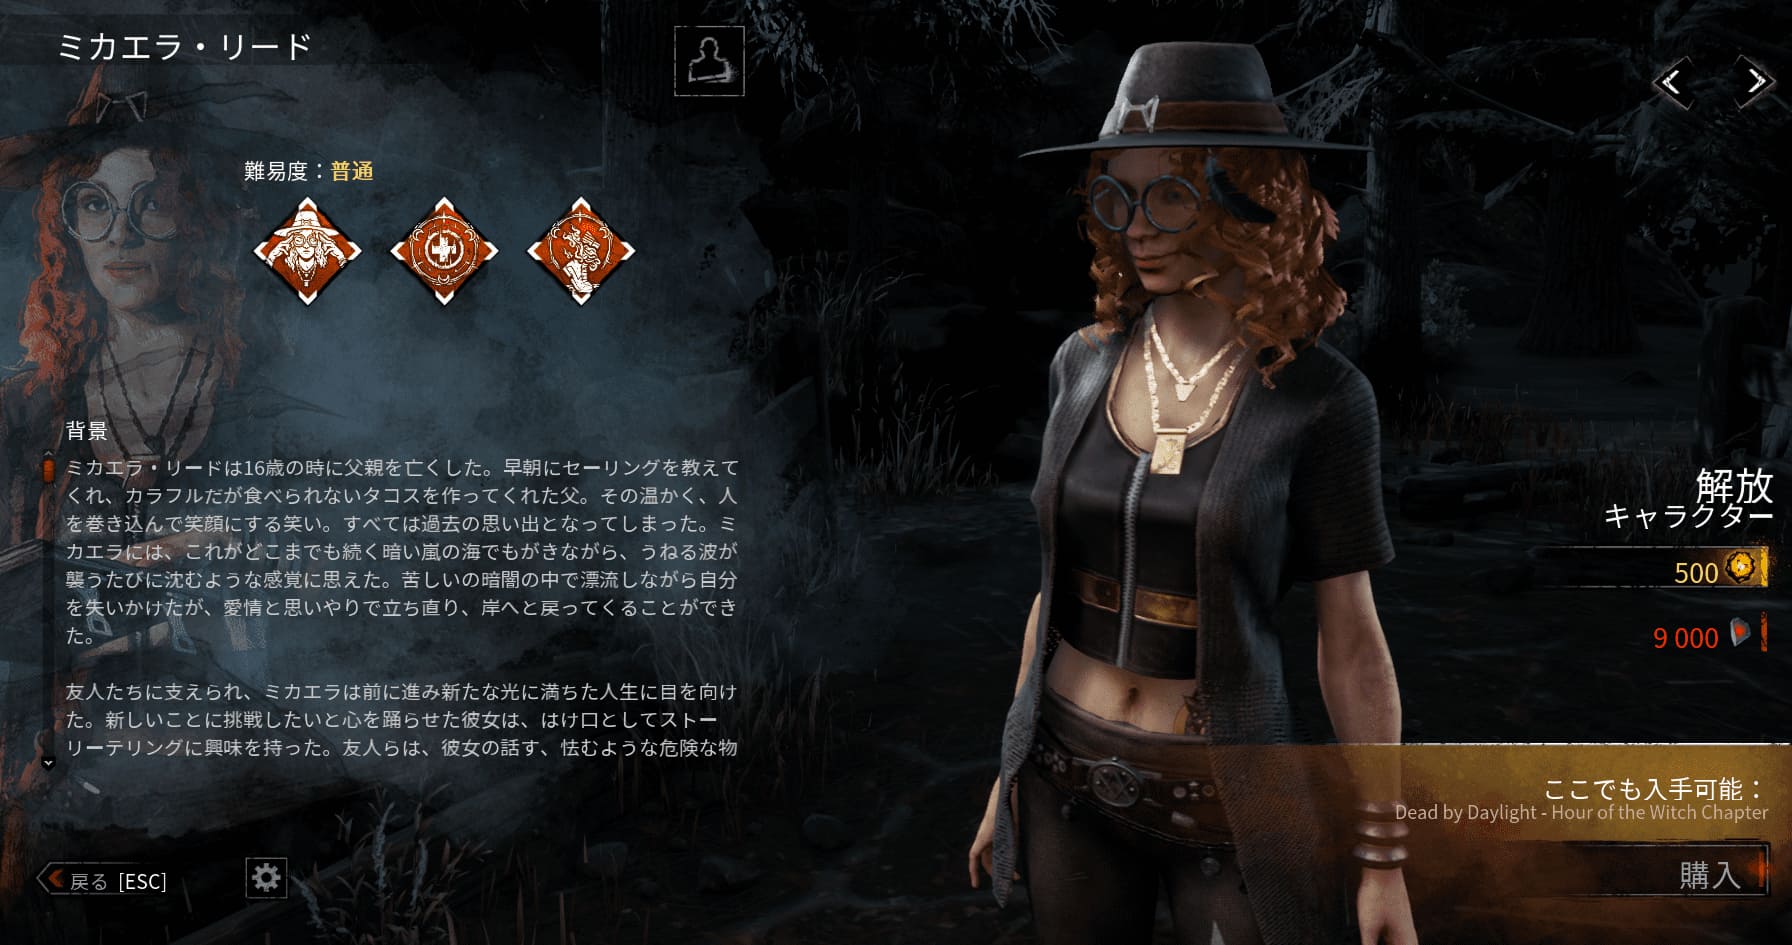 Dead By Daylight 新チャプター Hour Of The Witch 正式実装 賛否両論 恵みのトーテム は 調整を受けつつ実装 Automaton